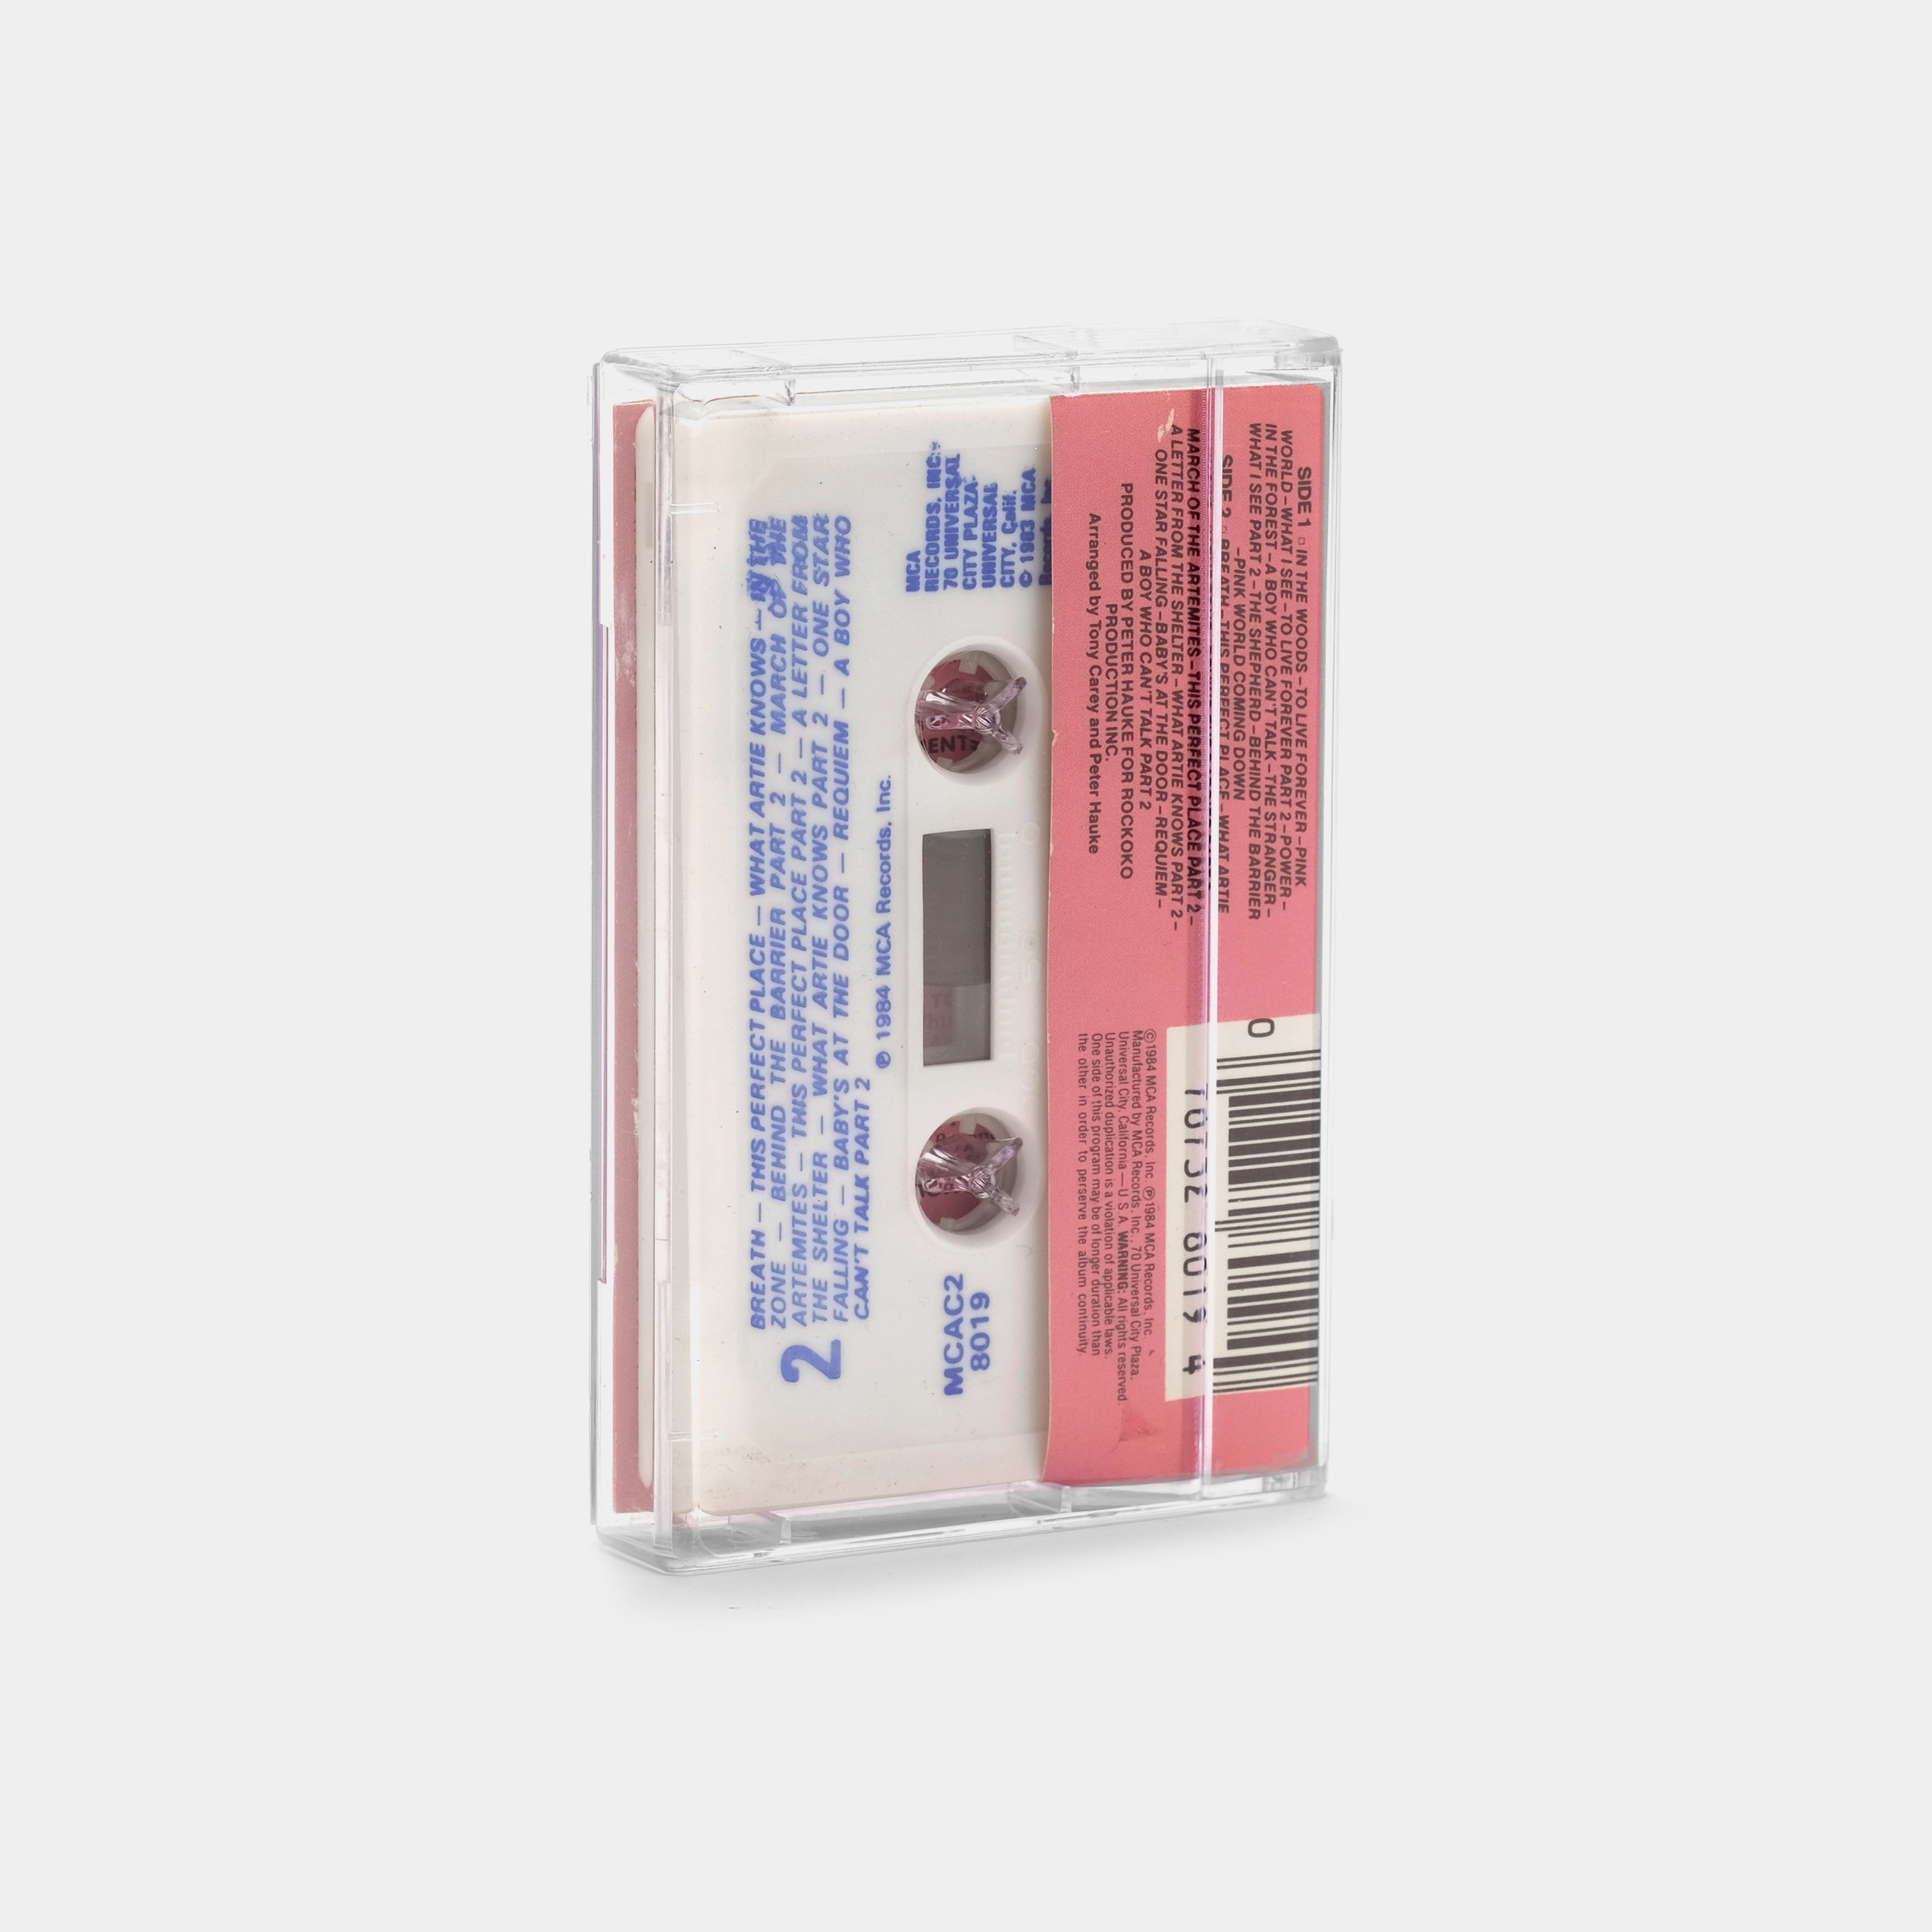 Planet P Project - Pink World Cassette Tape